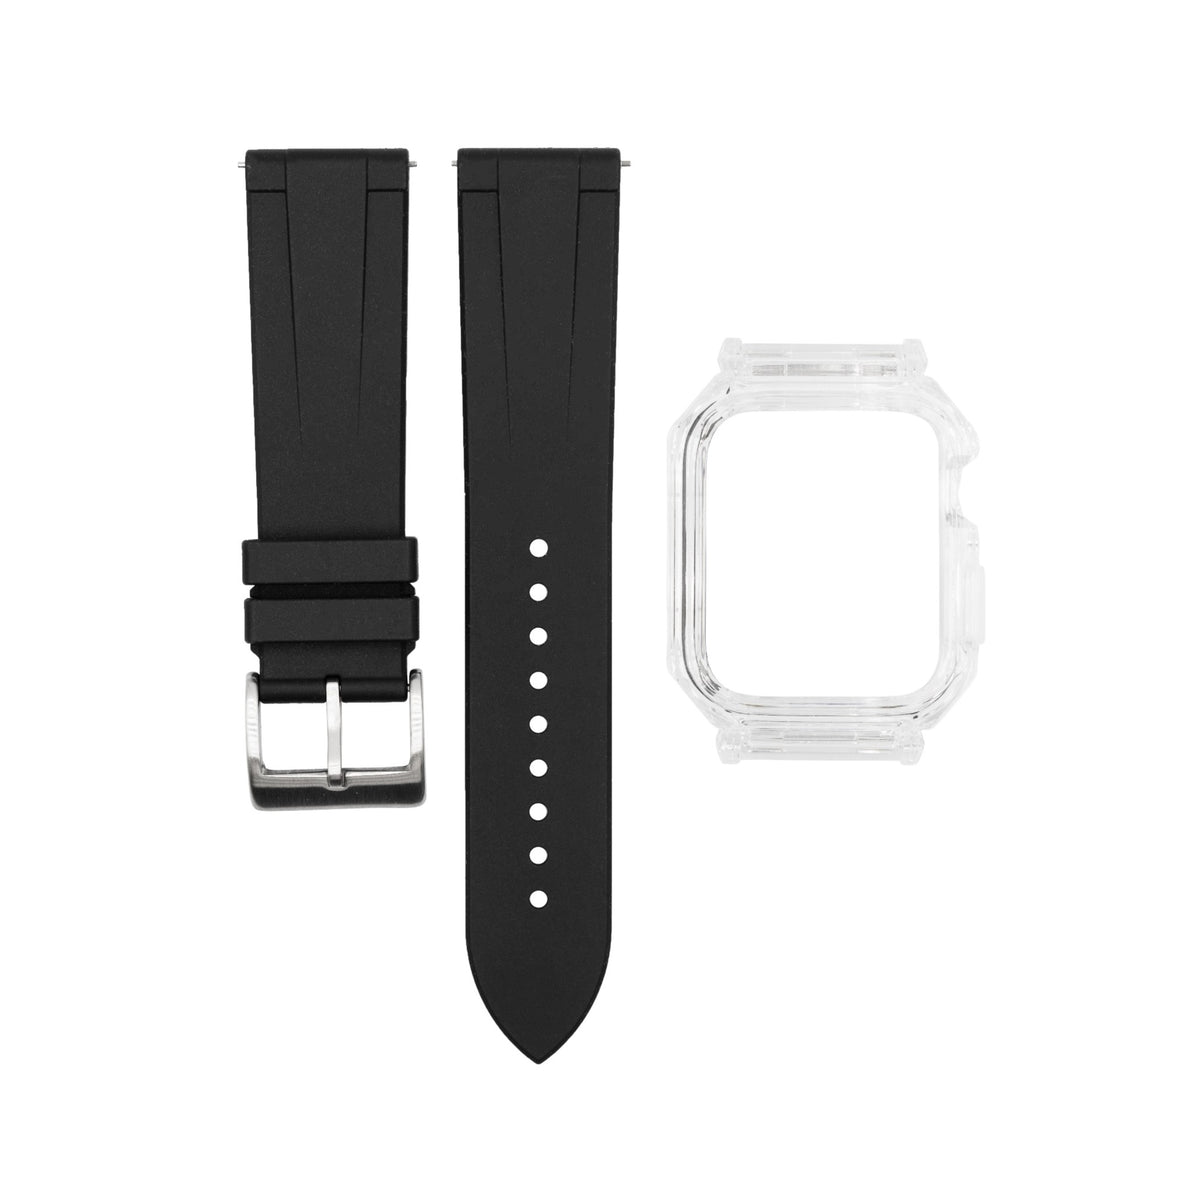 Apple Watch Rubber Mod Kit in Black - Nomad Watch Works SG